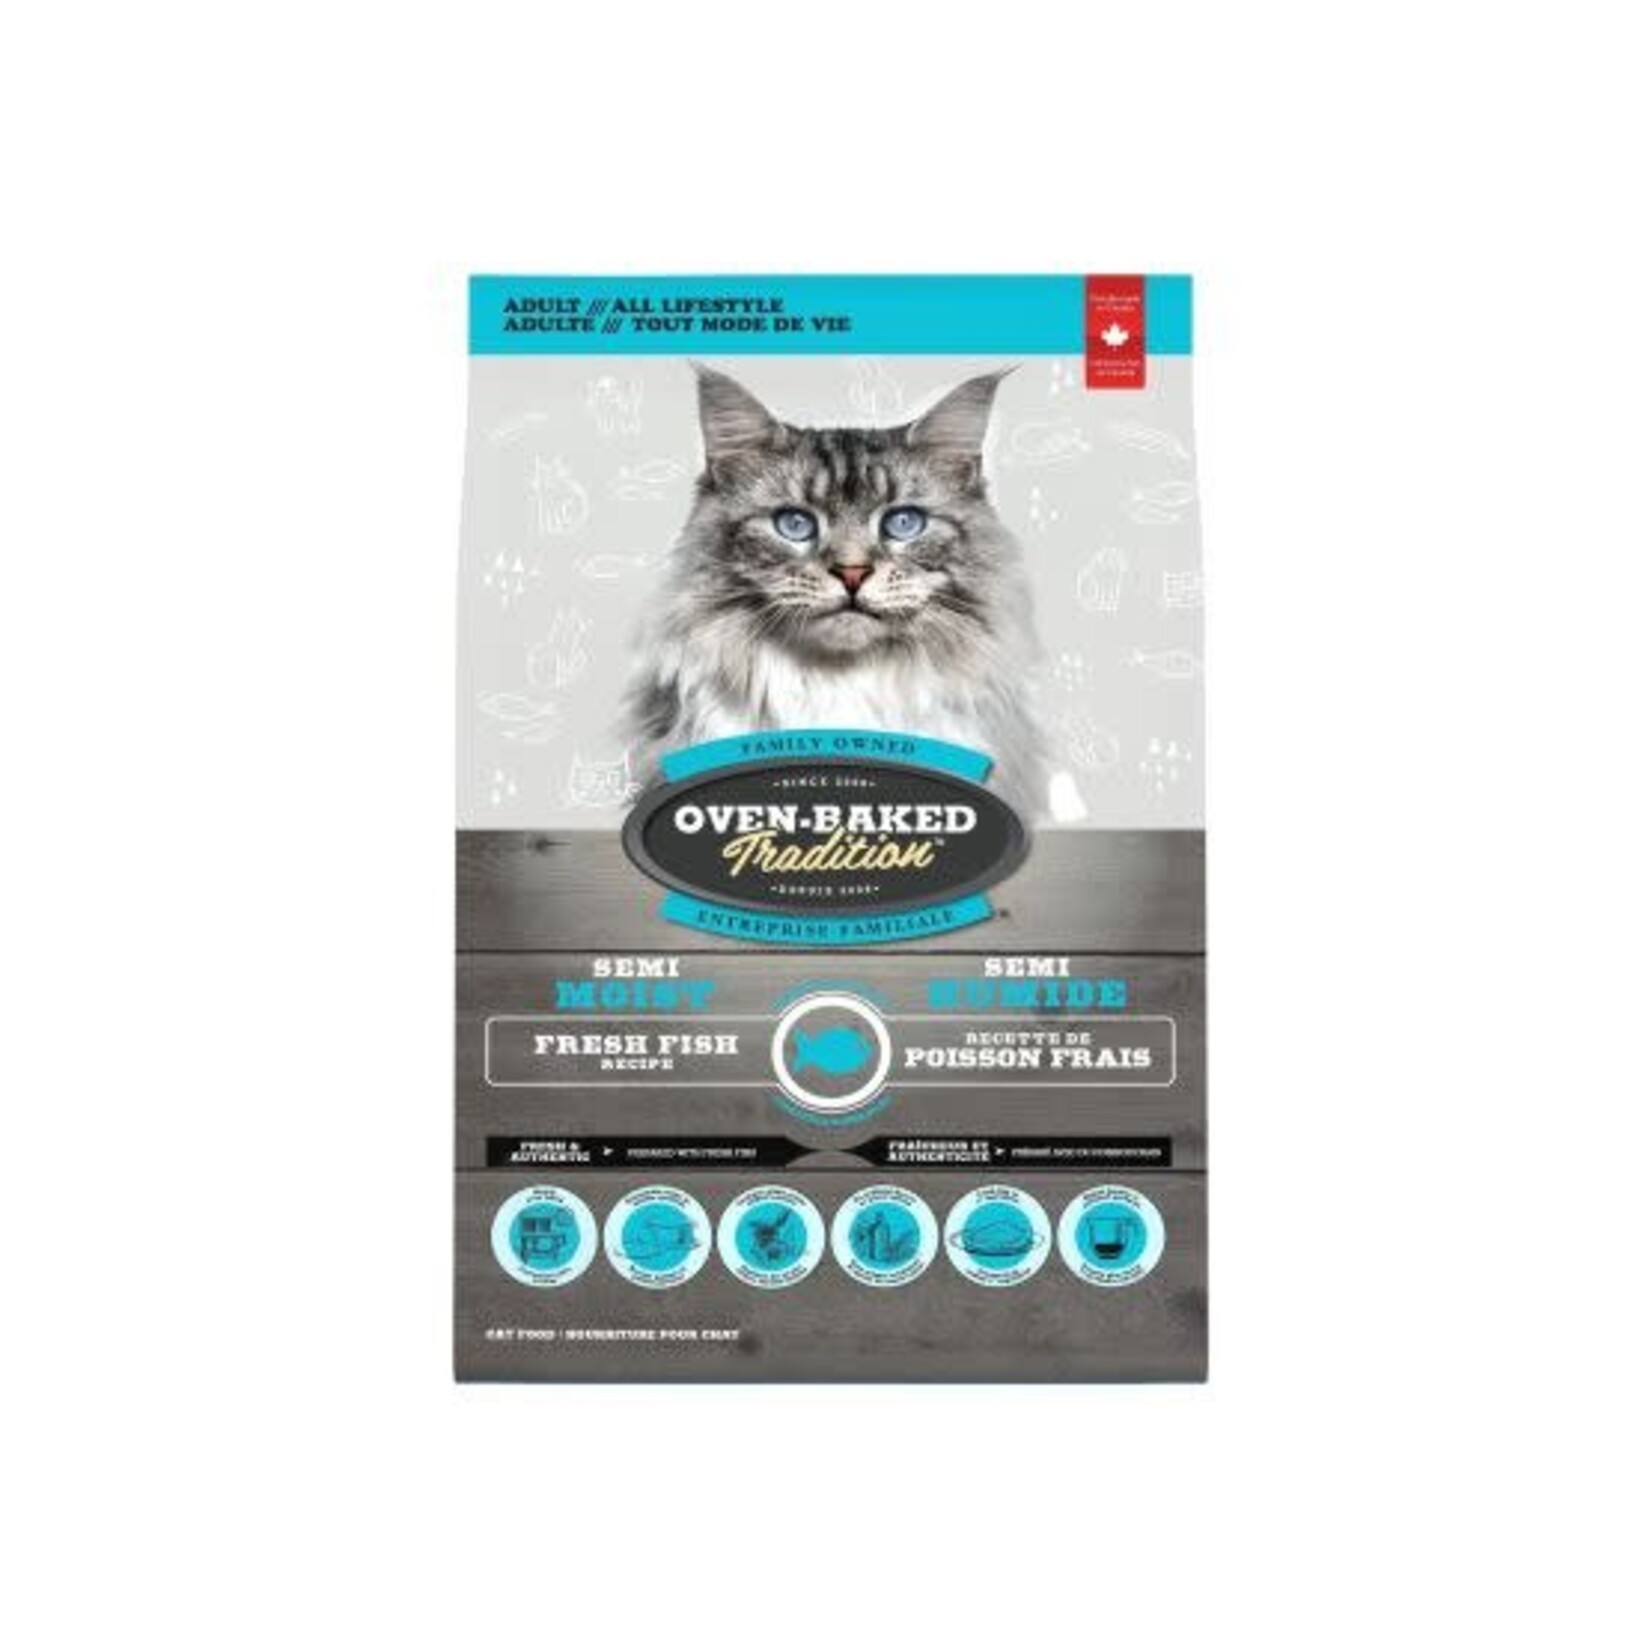 Oven-Baked Tradition Obt Nourriture Semi-humide Pour Chat - Poisson 5 Lbs